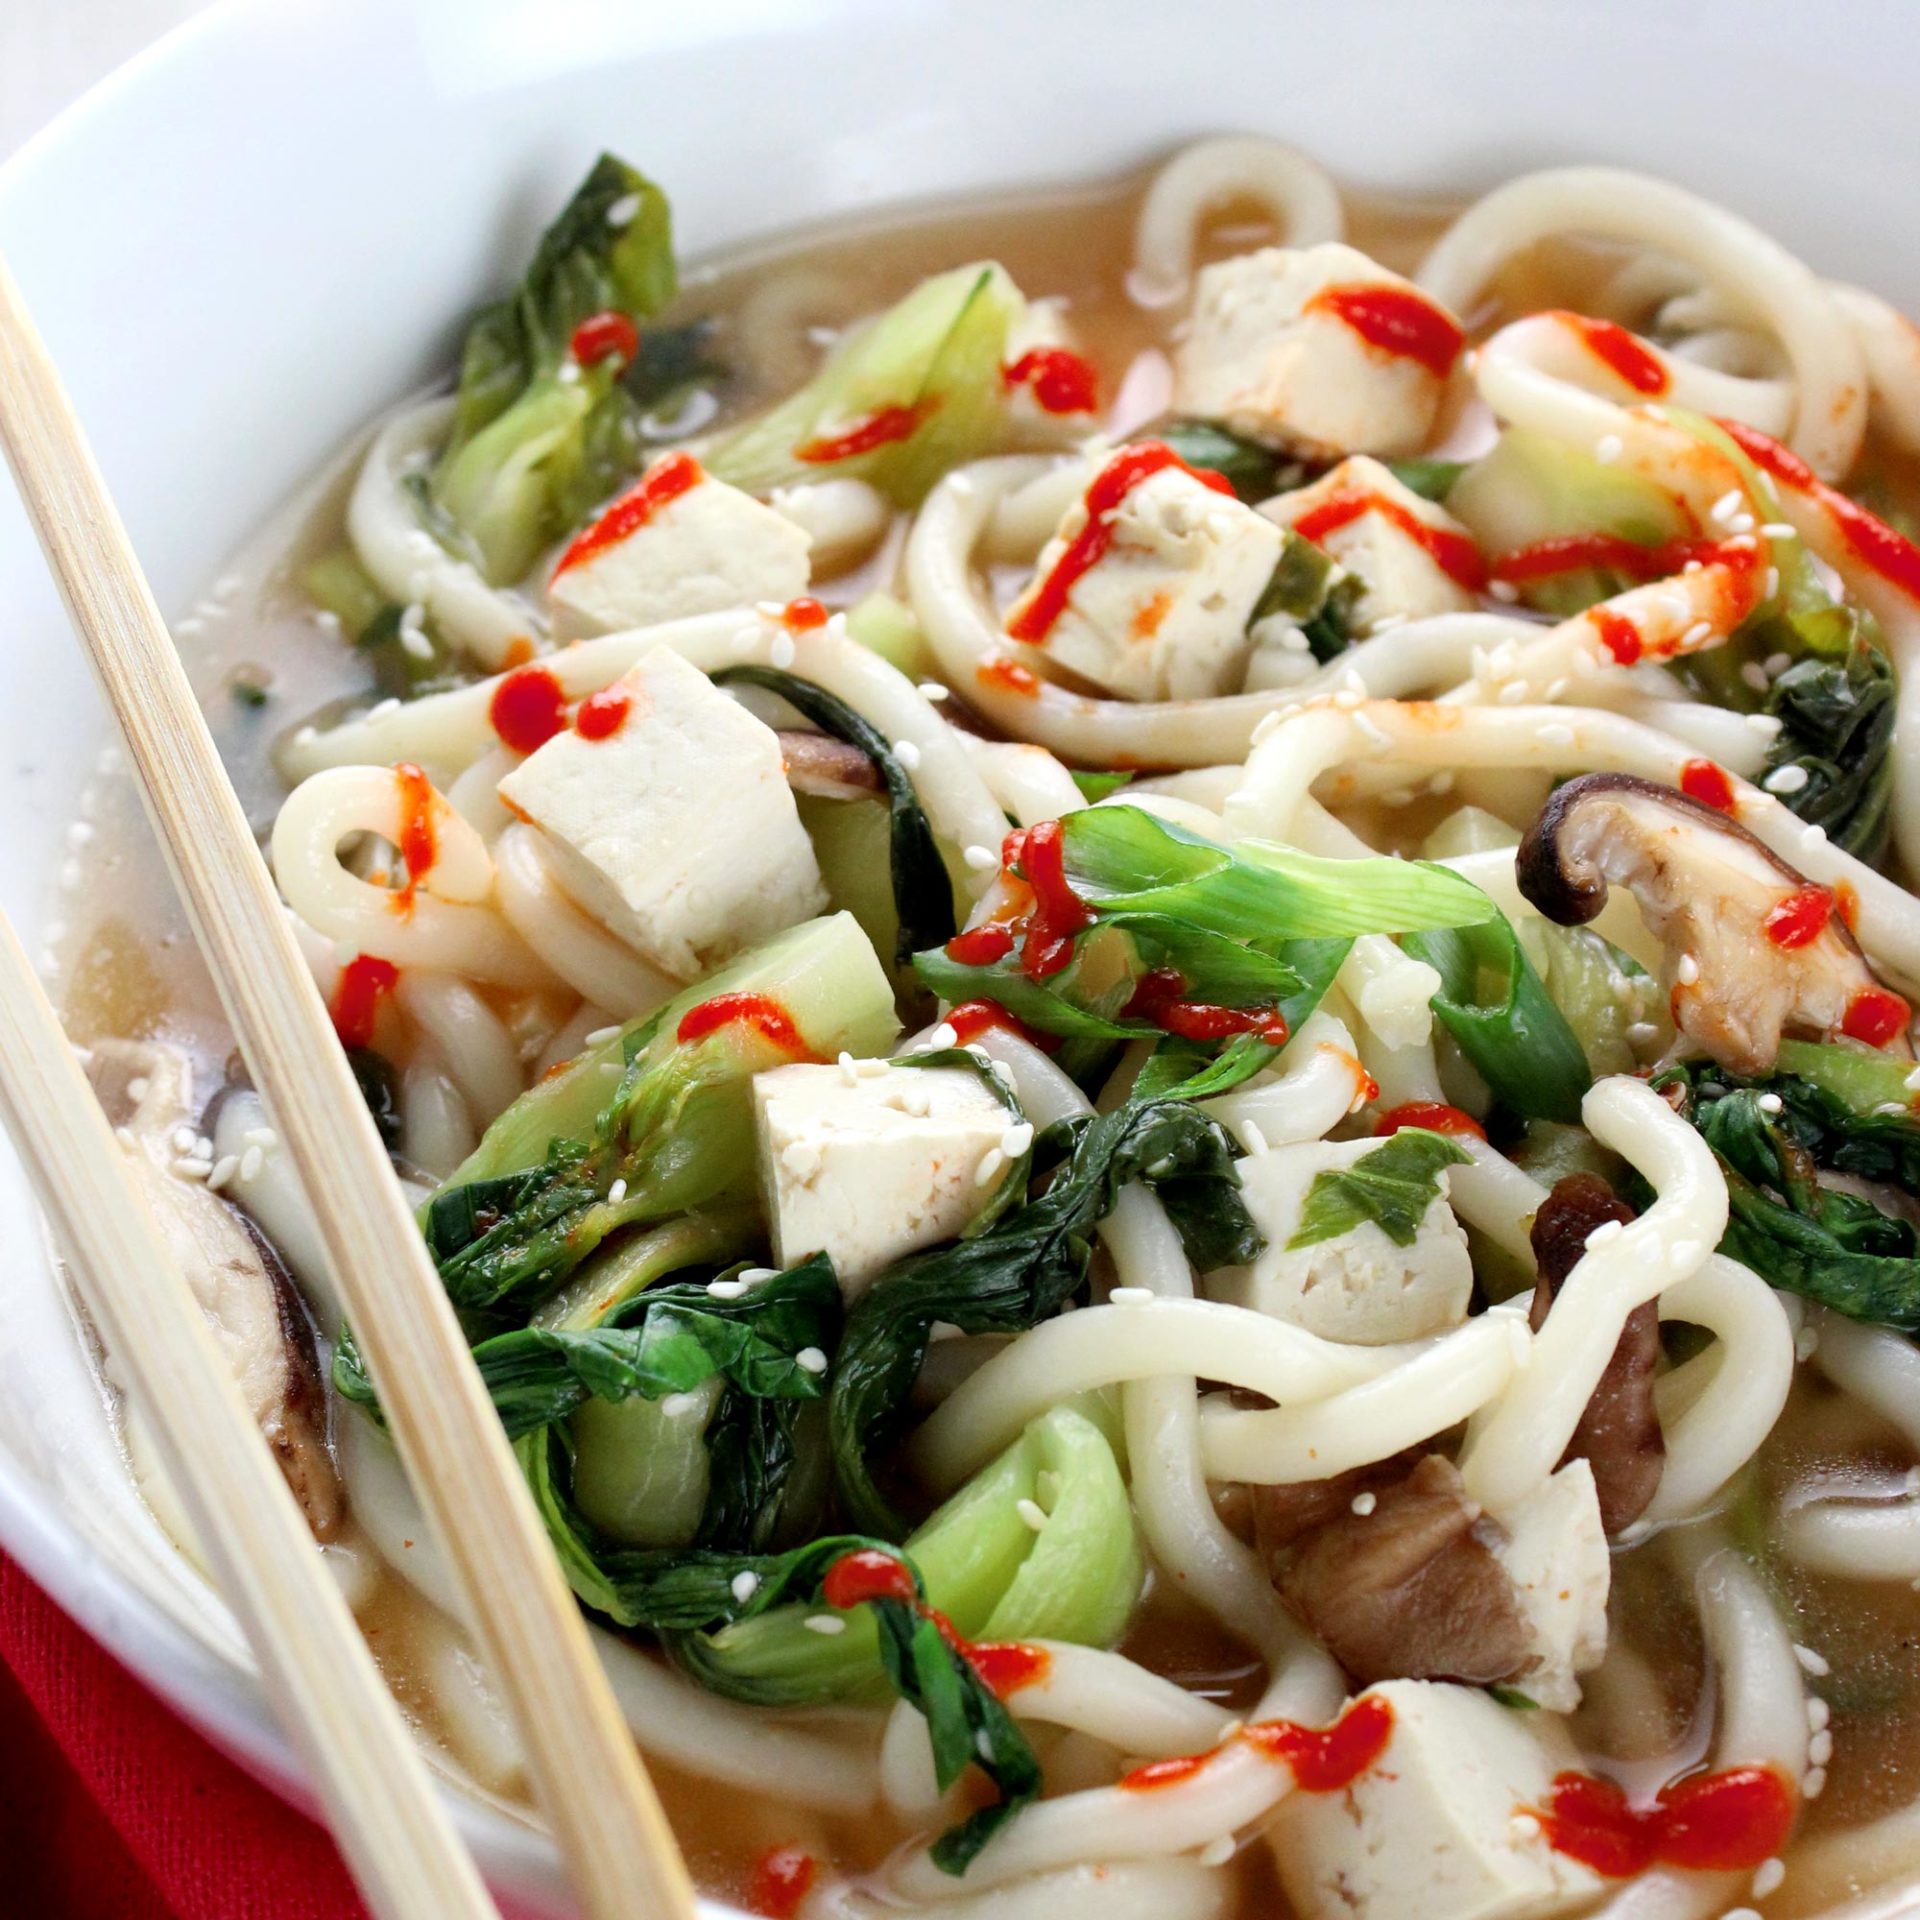 Miso Udon Noodle Soup with Teriyaki Mushrooms - The Foodie Takes Flight